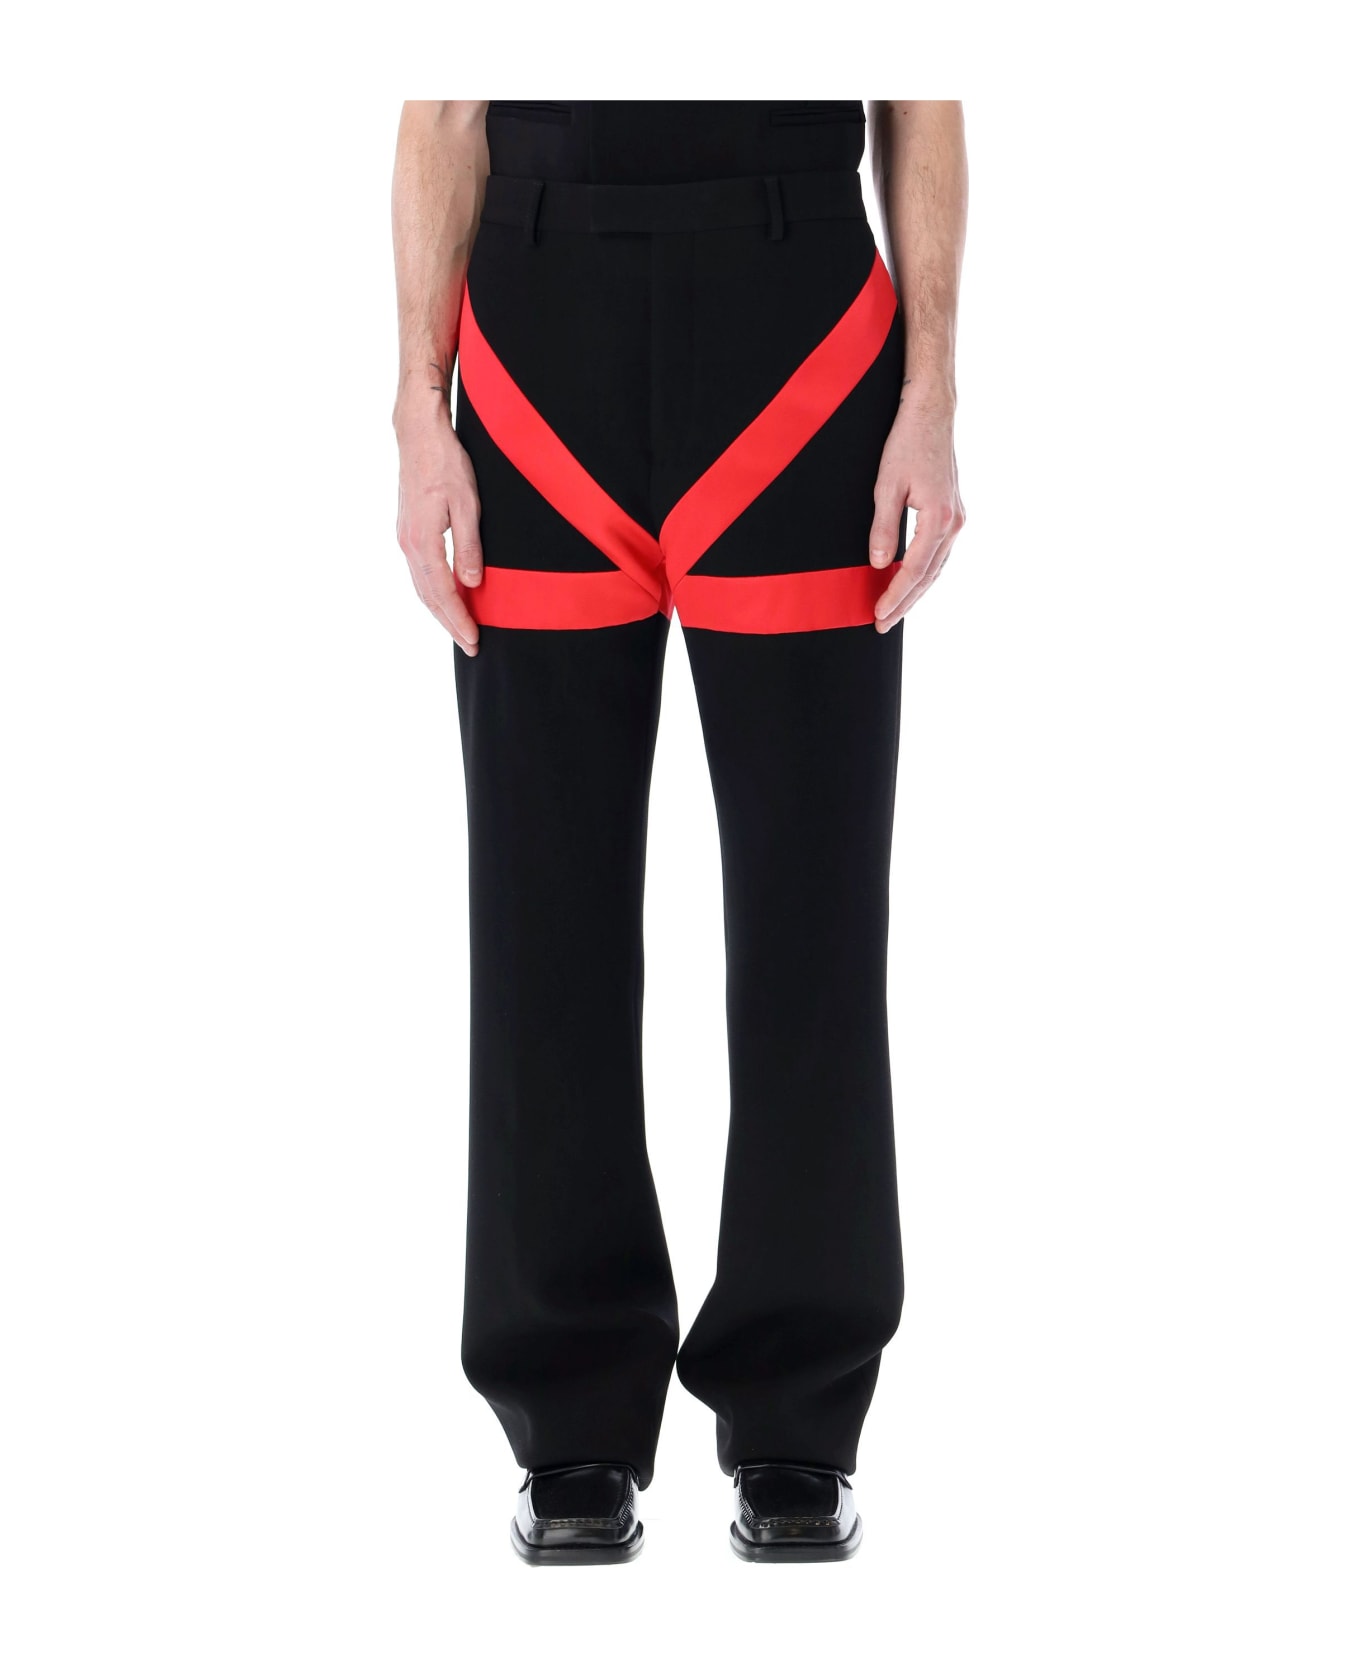 Ferragamo Tailored Pants With Inlays - BLACK RED